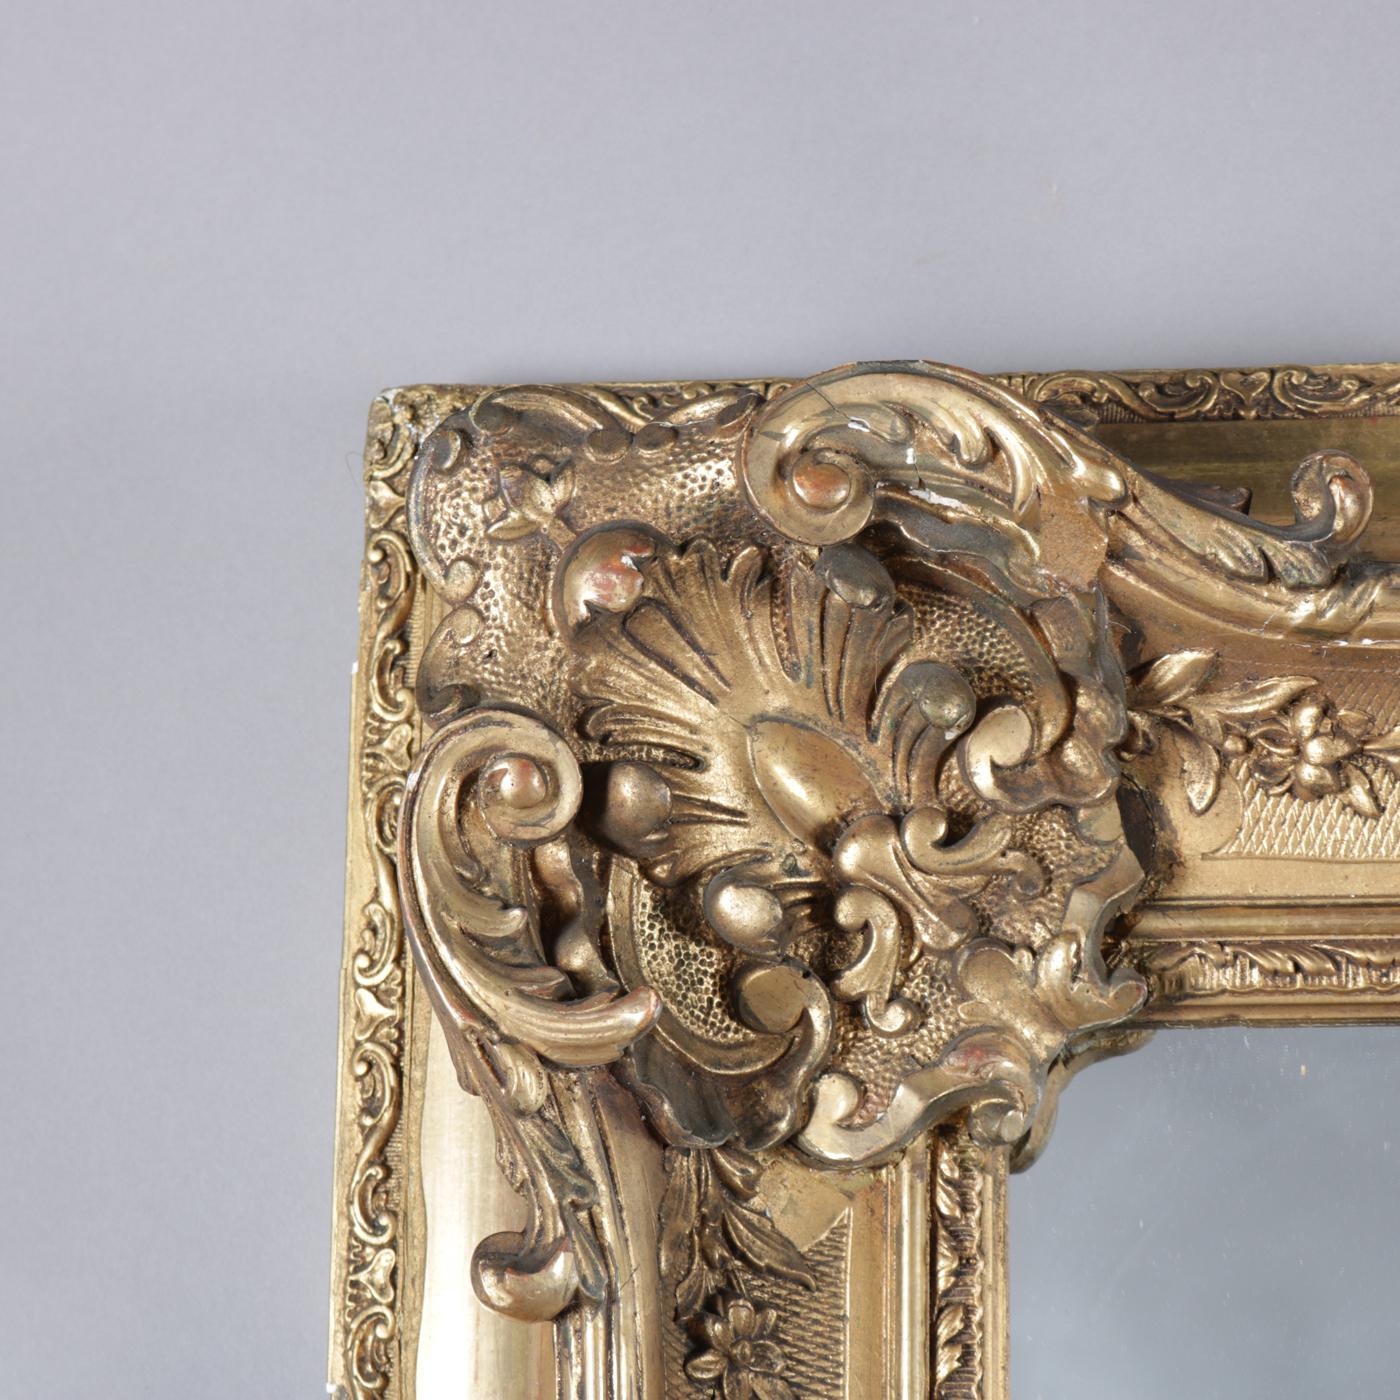 An antique and large French Louis XIV style wall mirror features giltwood frame with foliate, scroll and palmette decoration, 19th century

Measures: overall 43